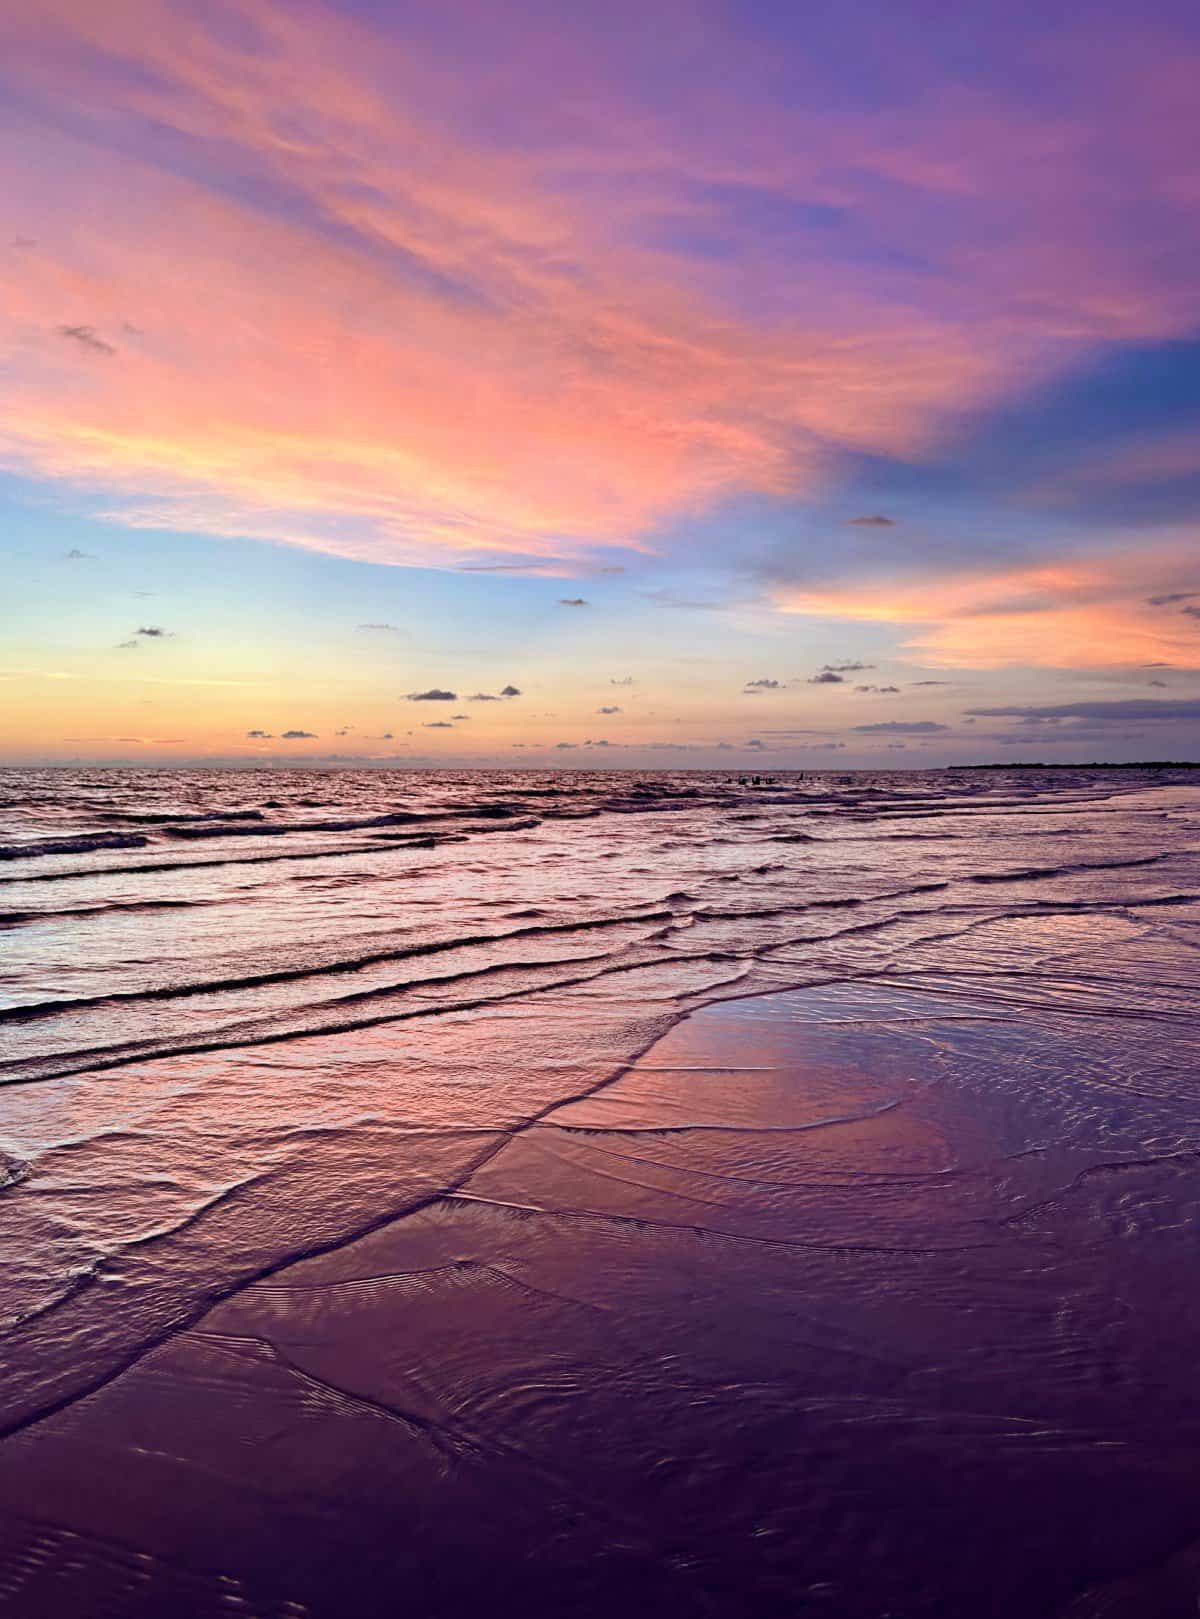 Marco Island is known for its sunsets, and the ones at JW Marriott Marco Island beach are amazing